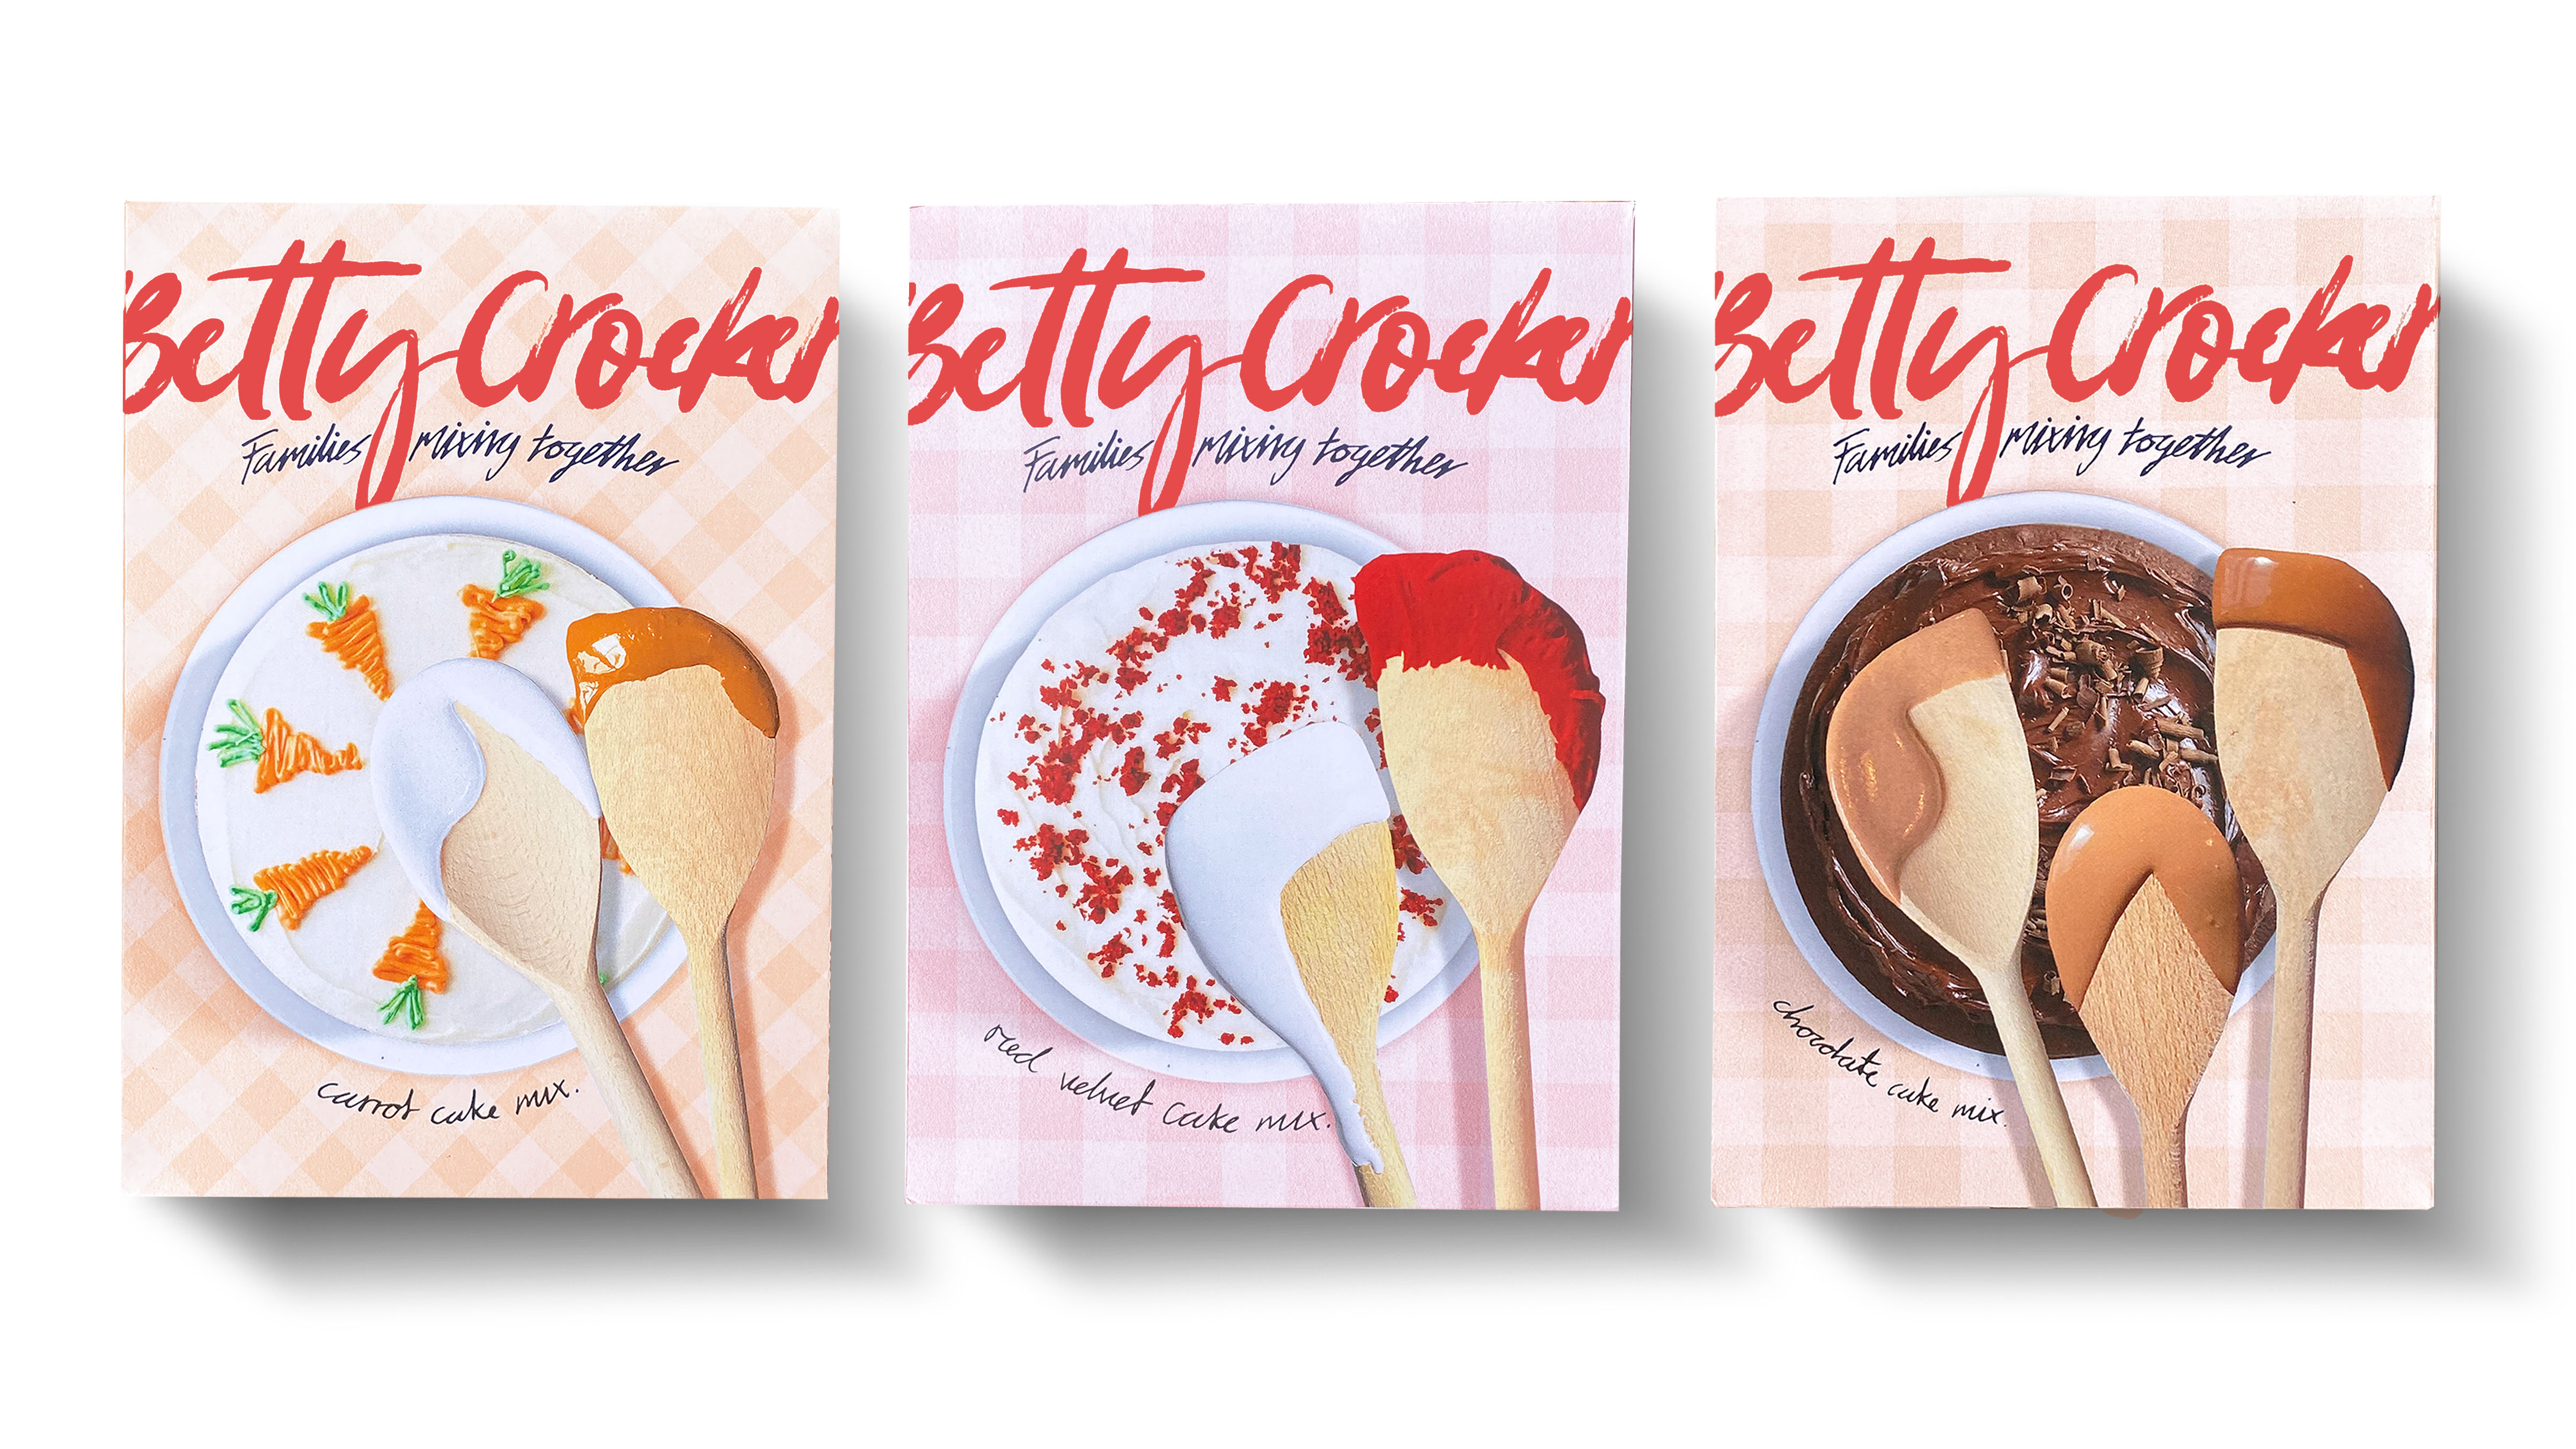 A Redesign of Betty Crocker's brand and packaging. The packaging shows different coloured gingham backgrounds, with a centred image of each cake, and characterful spoons, with hairstyles made from the cake mixture.